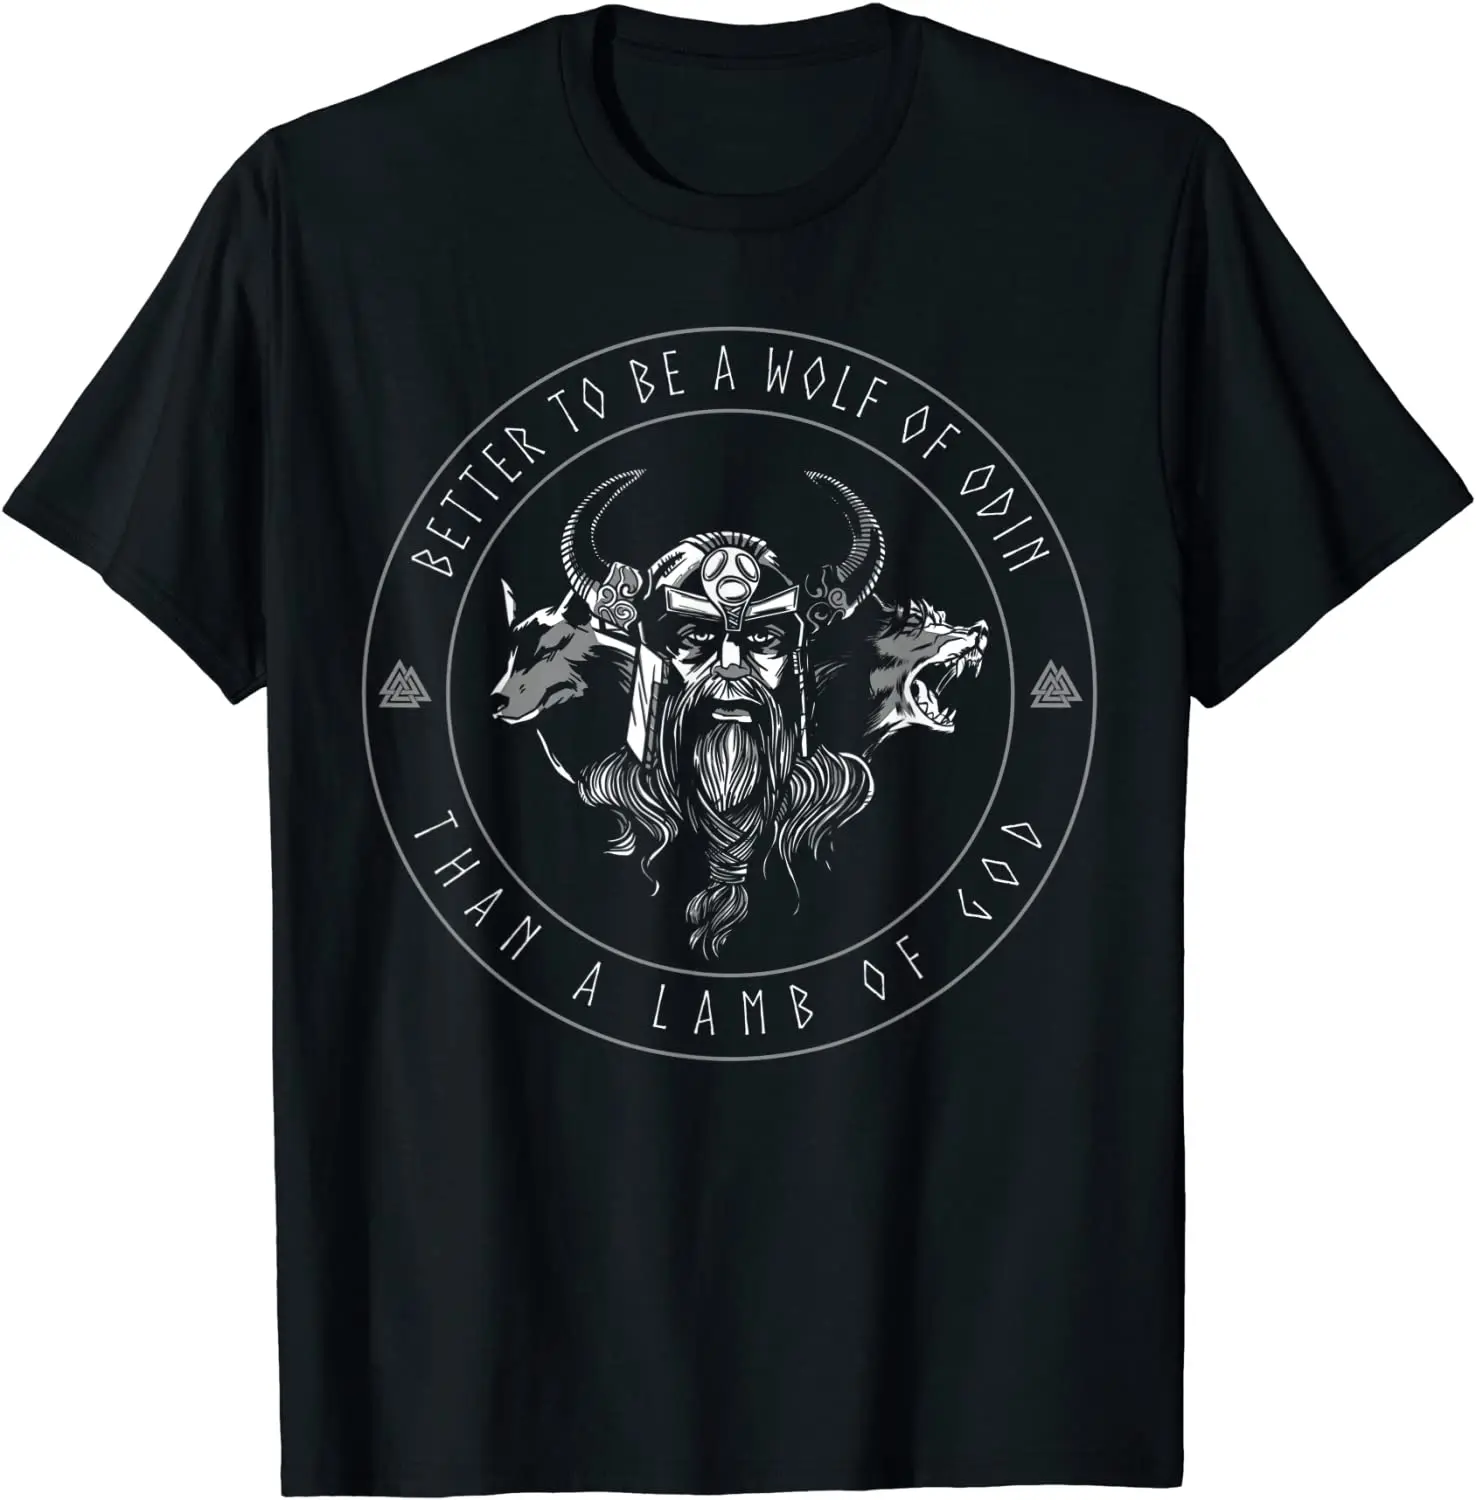 

Better Be A Wolf of Odin - Norse Myth Viking'er Warrior Motto T-Shirt 100% Cotton O-Neck Summer Short Sleeve Casual Mens T-shirt